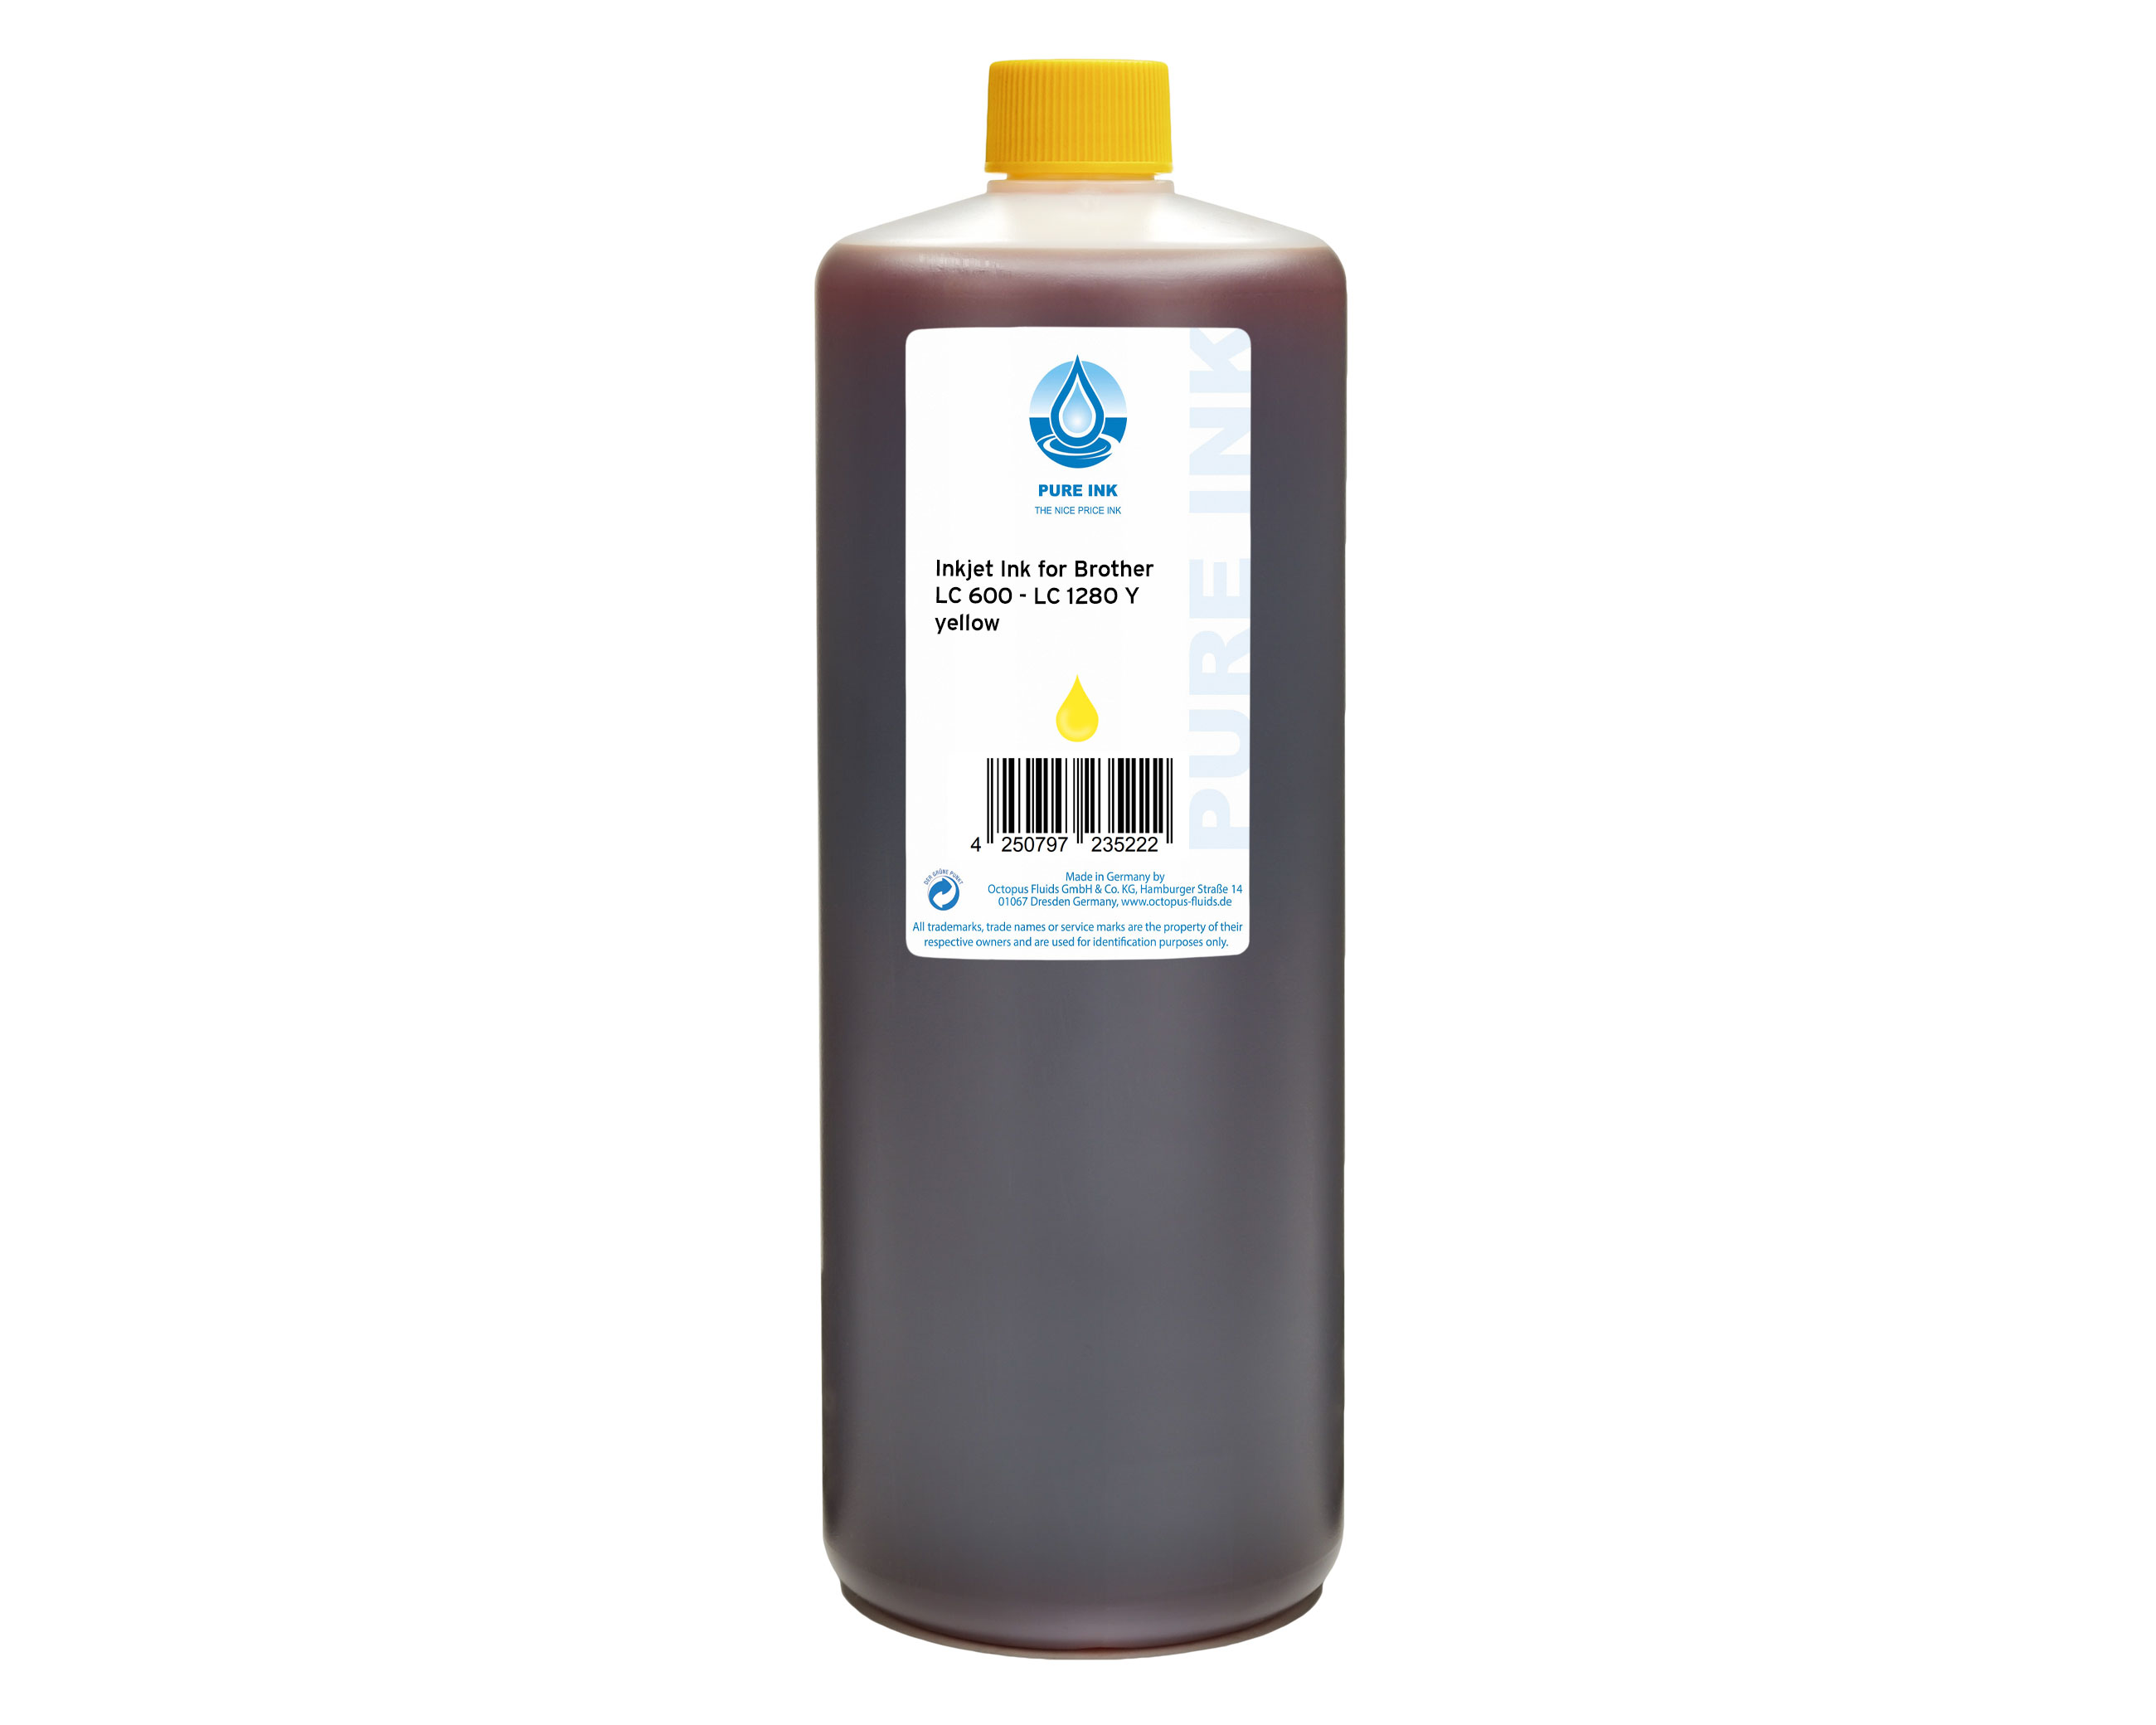 PURE INK Printer Ink for Brother LC-600, LC-1280 yellow